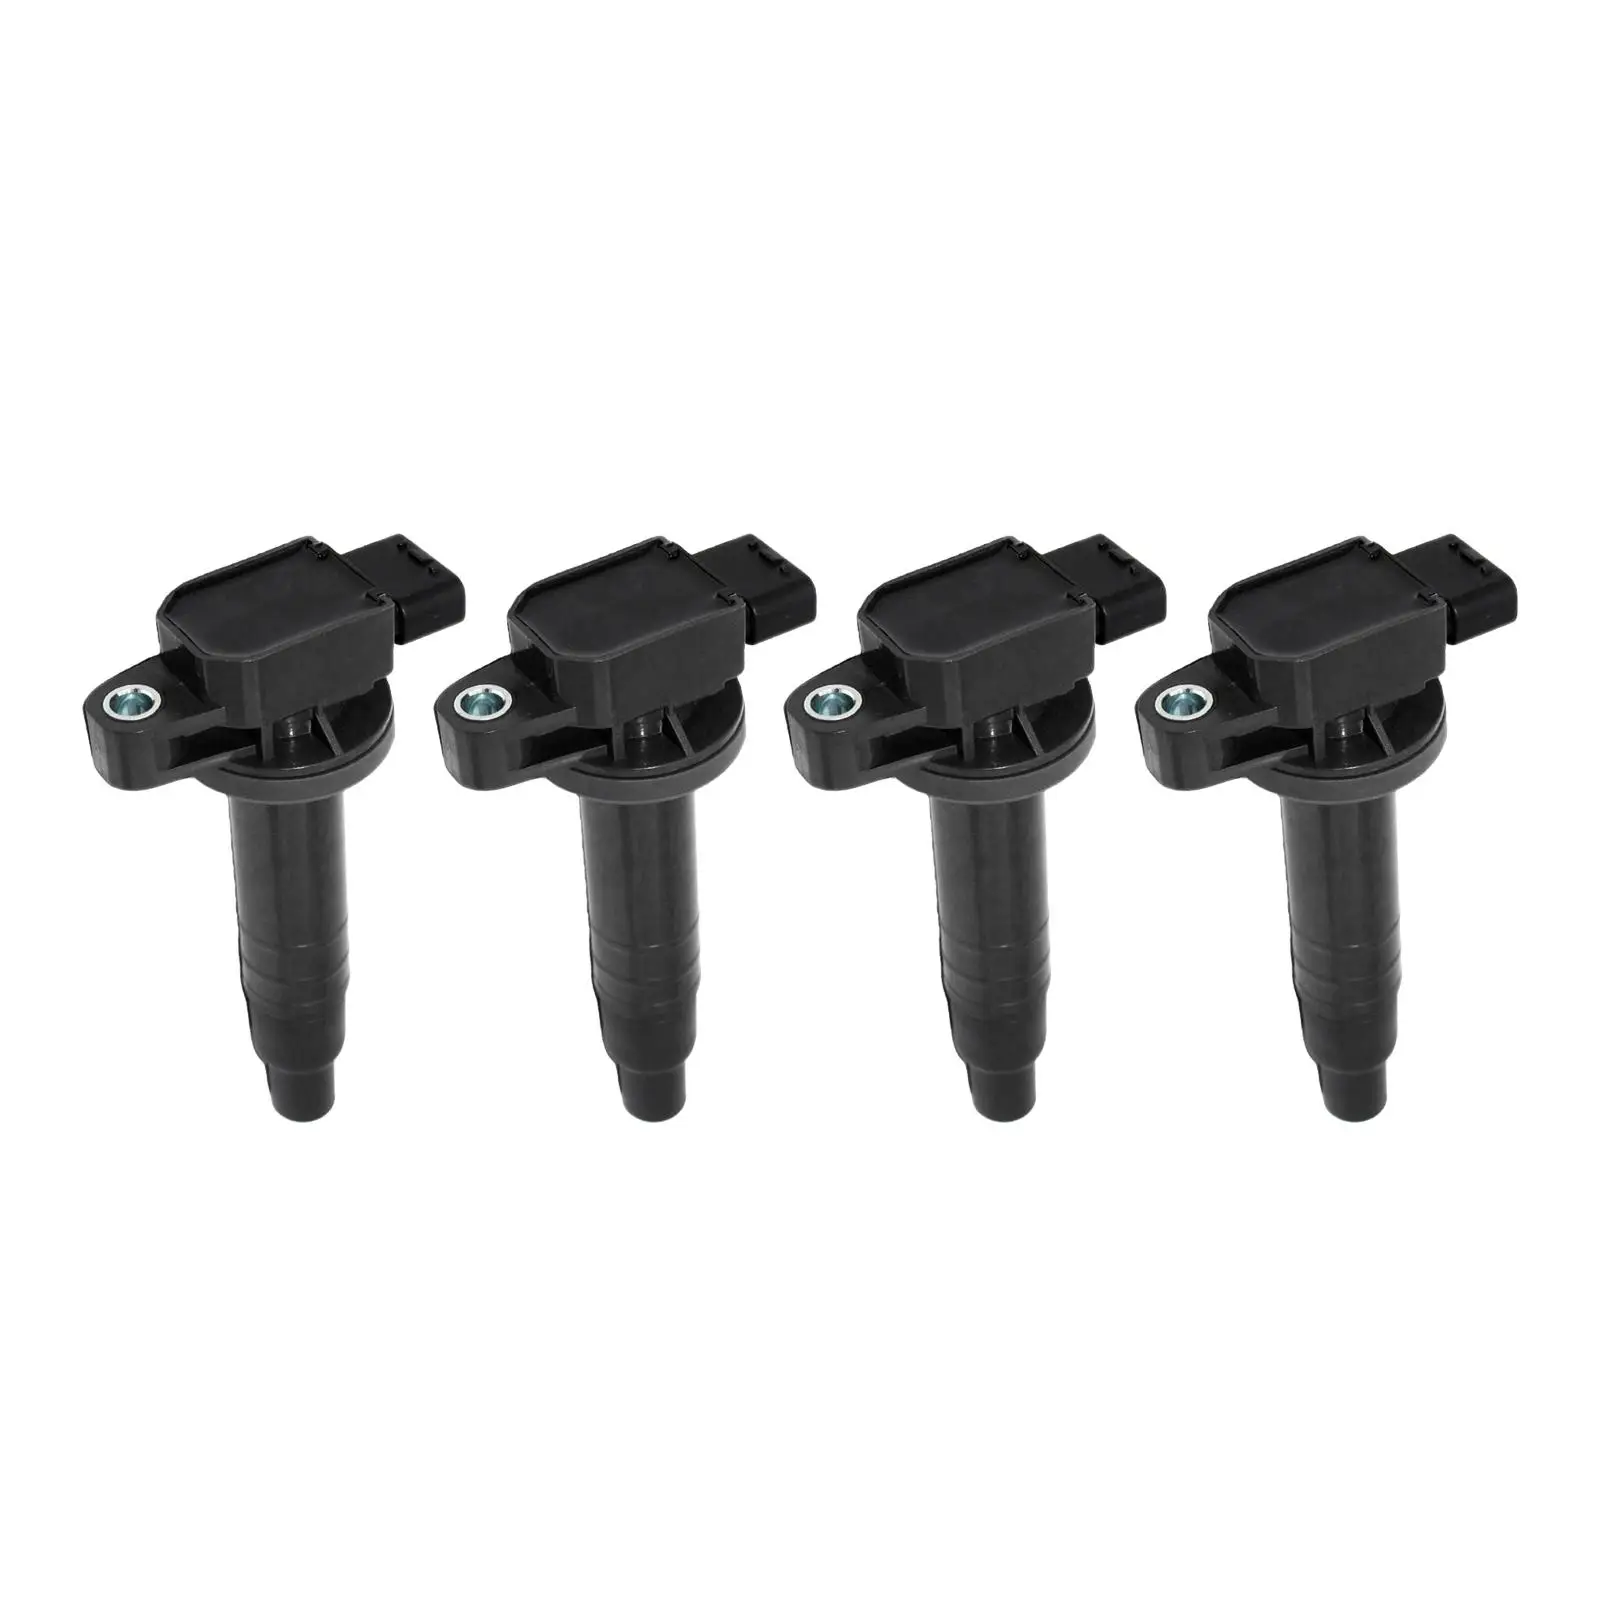 4x Ignition Coils 90919-02240 Replace for Toyota 1.5L for prius Yaris